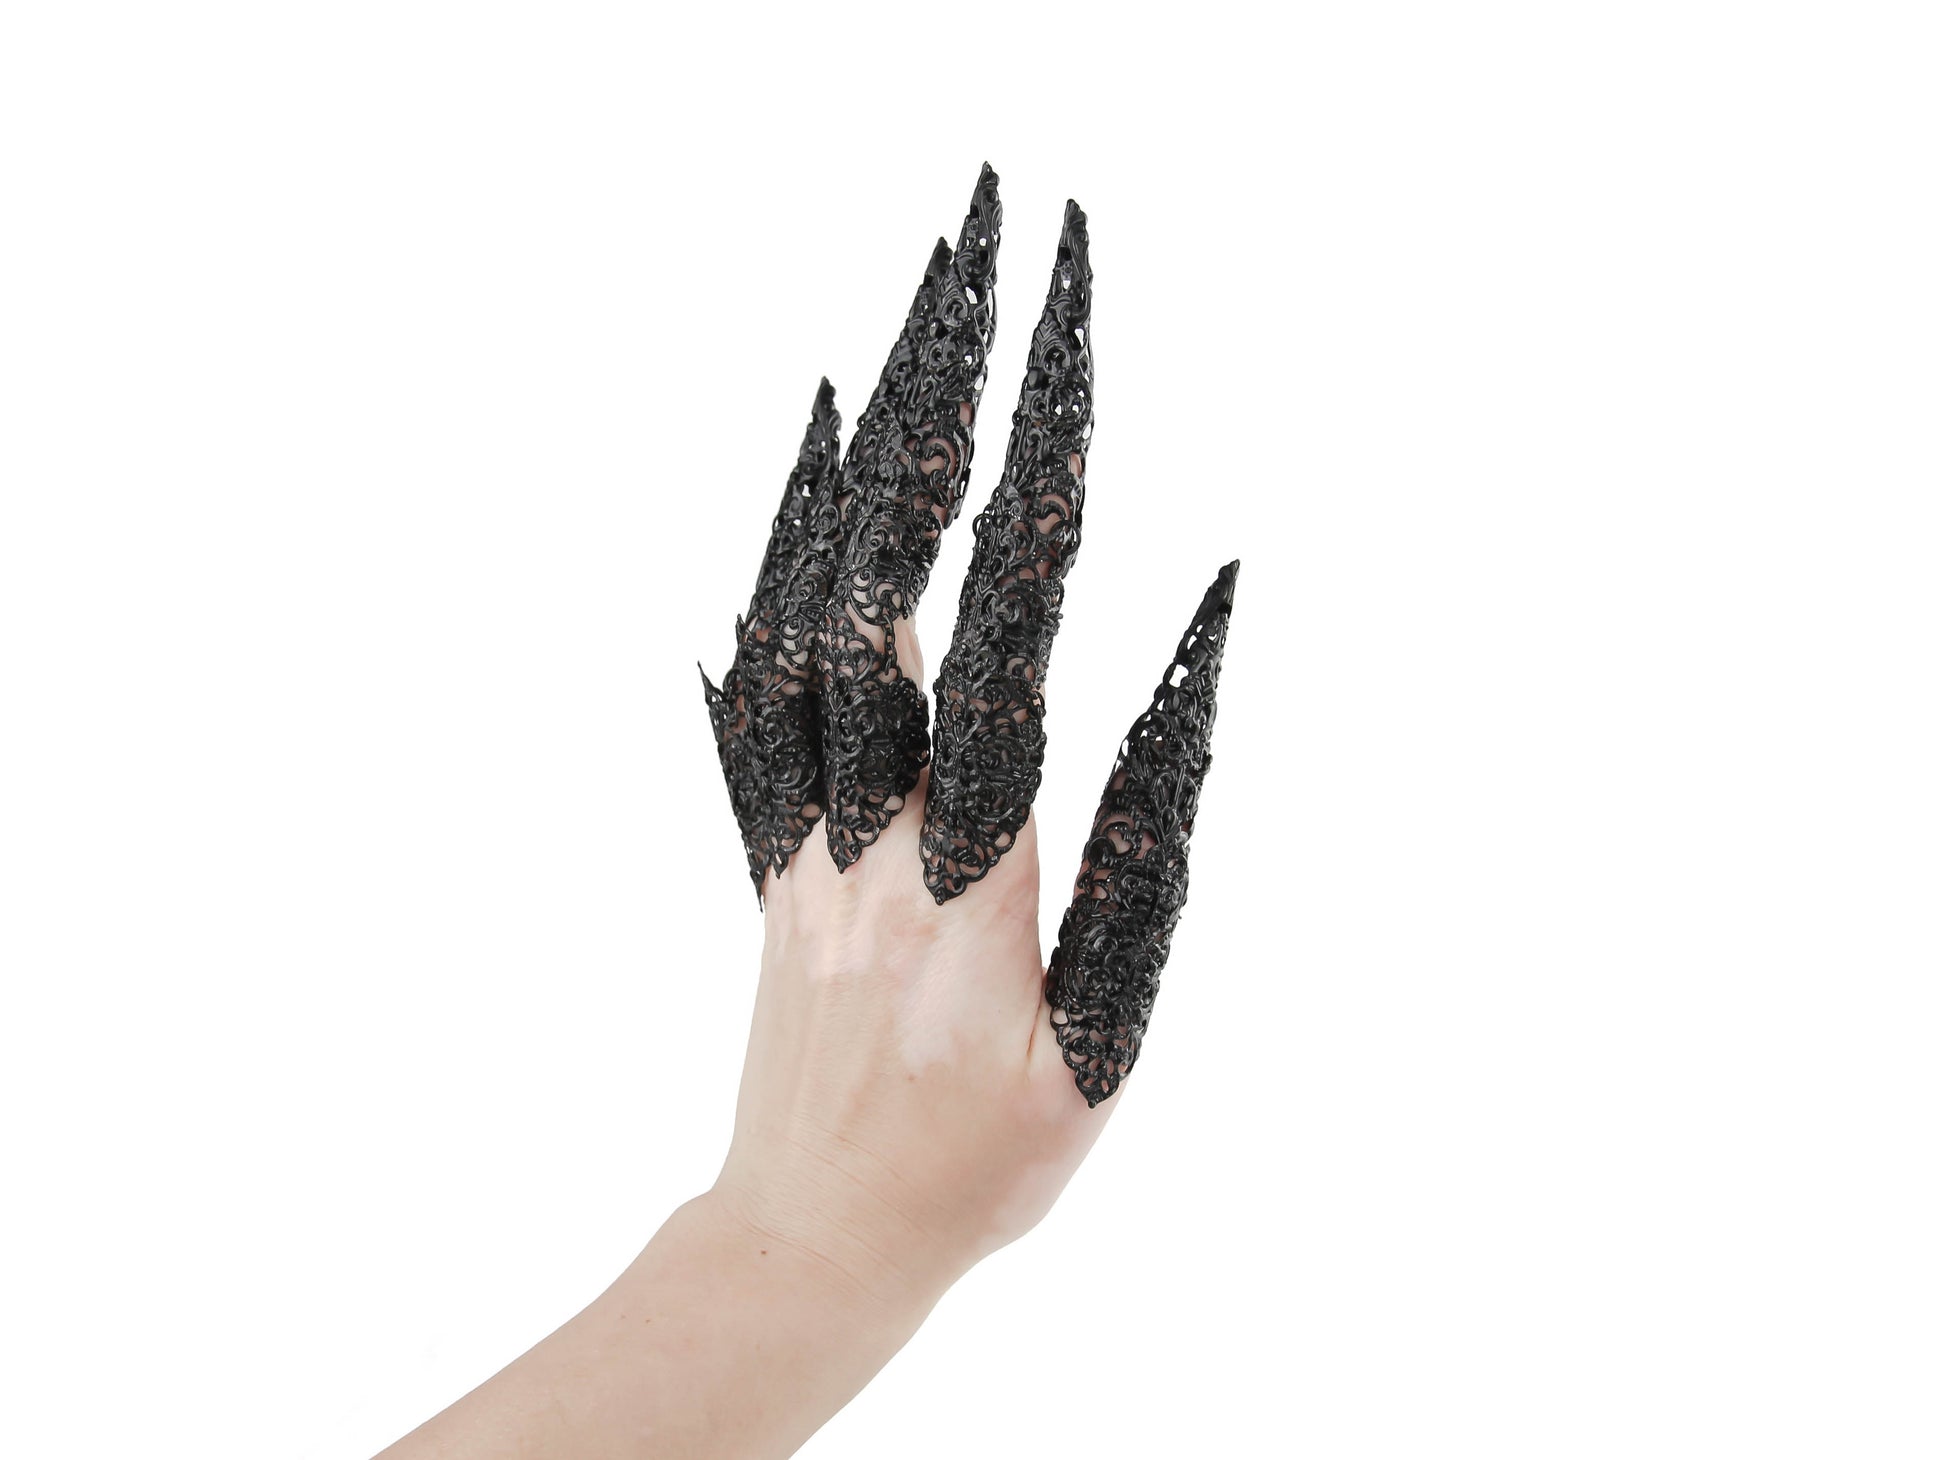 A hand is adorned with a full set of intricate, silver full-finger black claw rings extending into long nail claws, encapsulating a neo-goth aesthetic. These bold, dark-avantgarde pieces from Myril Jewels offer a unique Halloween or everyday wear option for gothic and alternative style enthusiasts seeking festival or rave party jewelry.